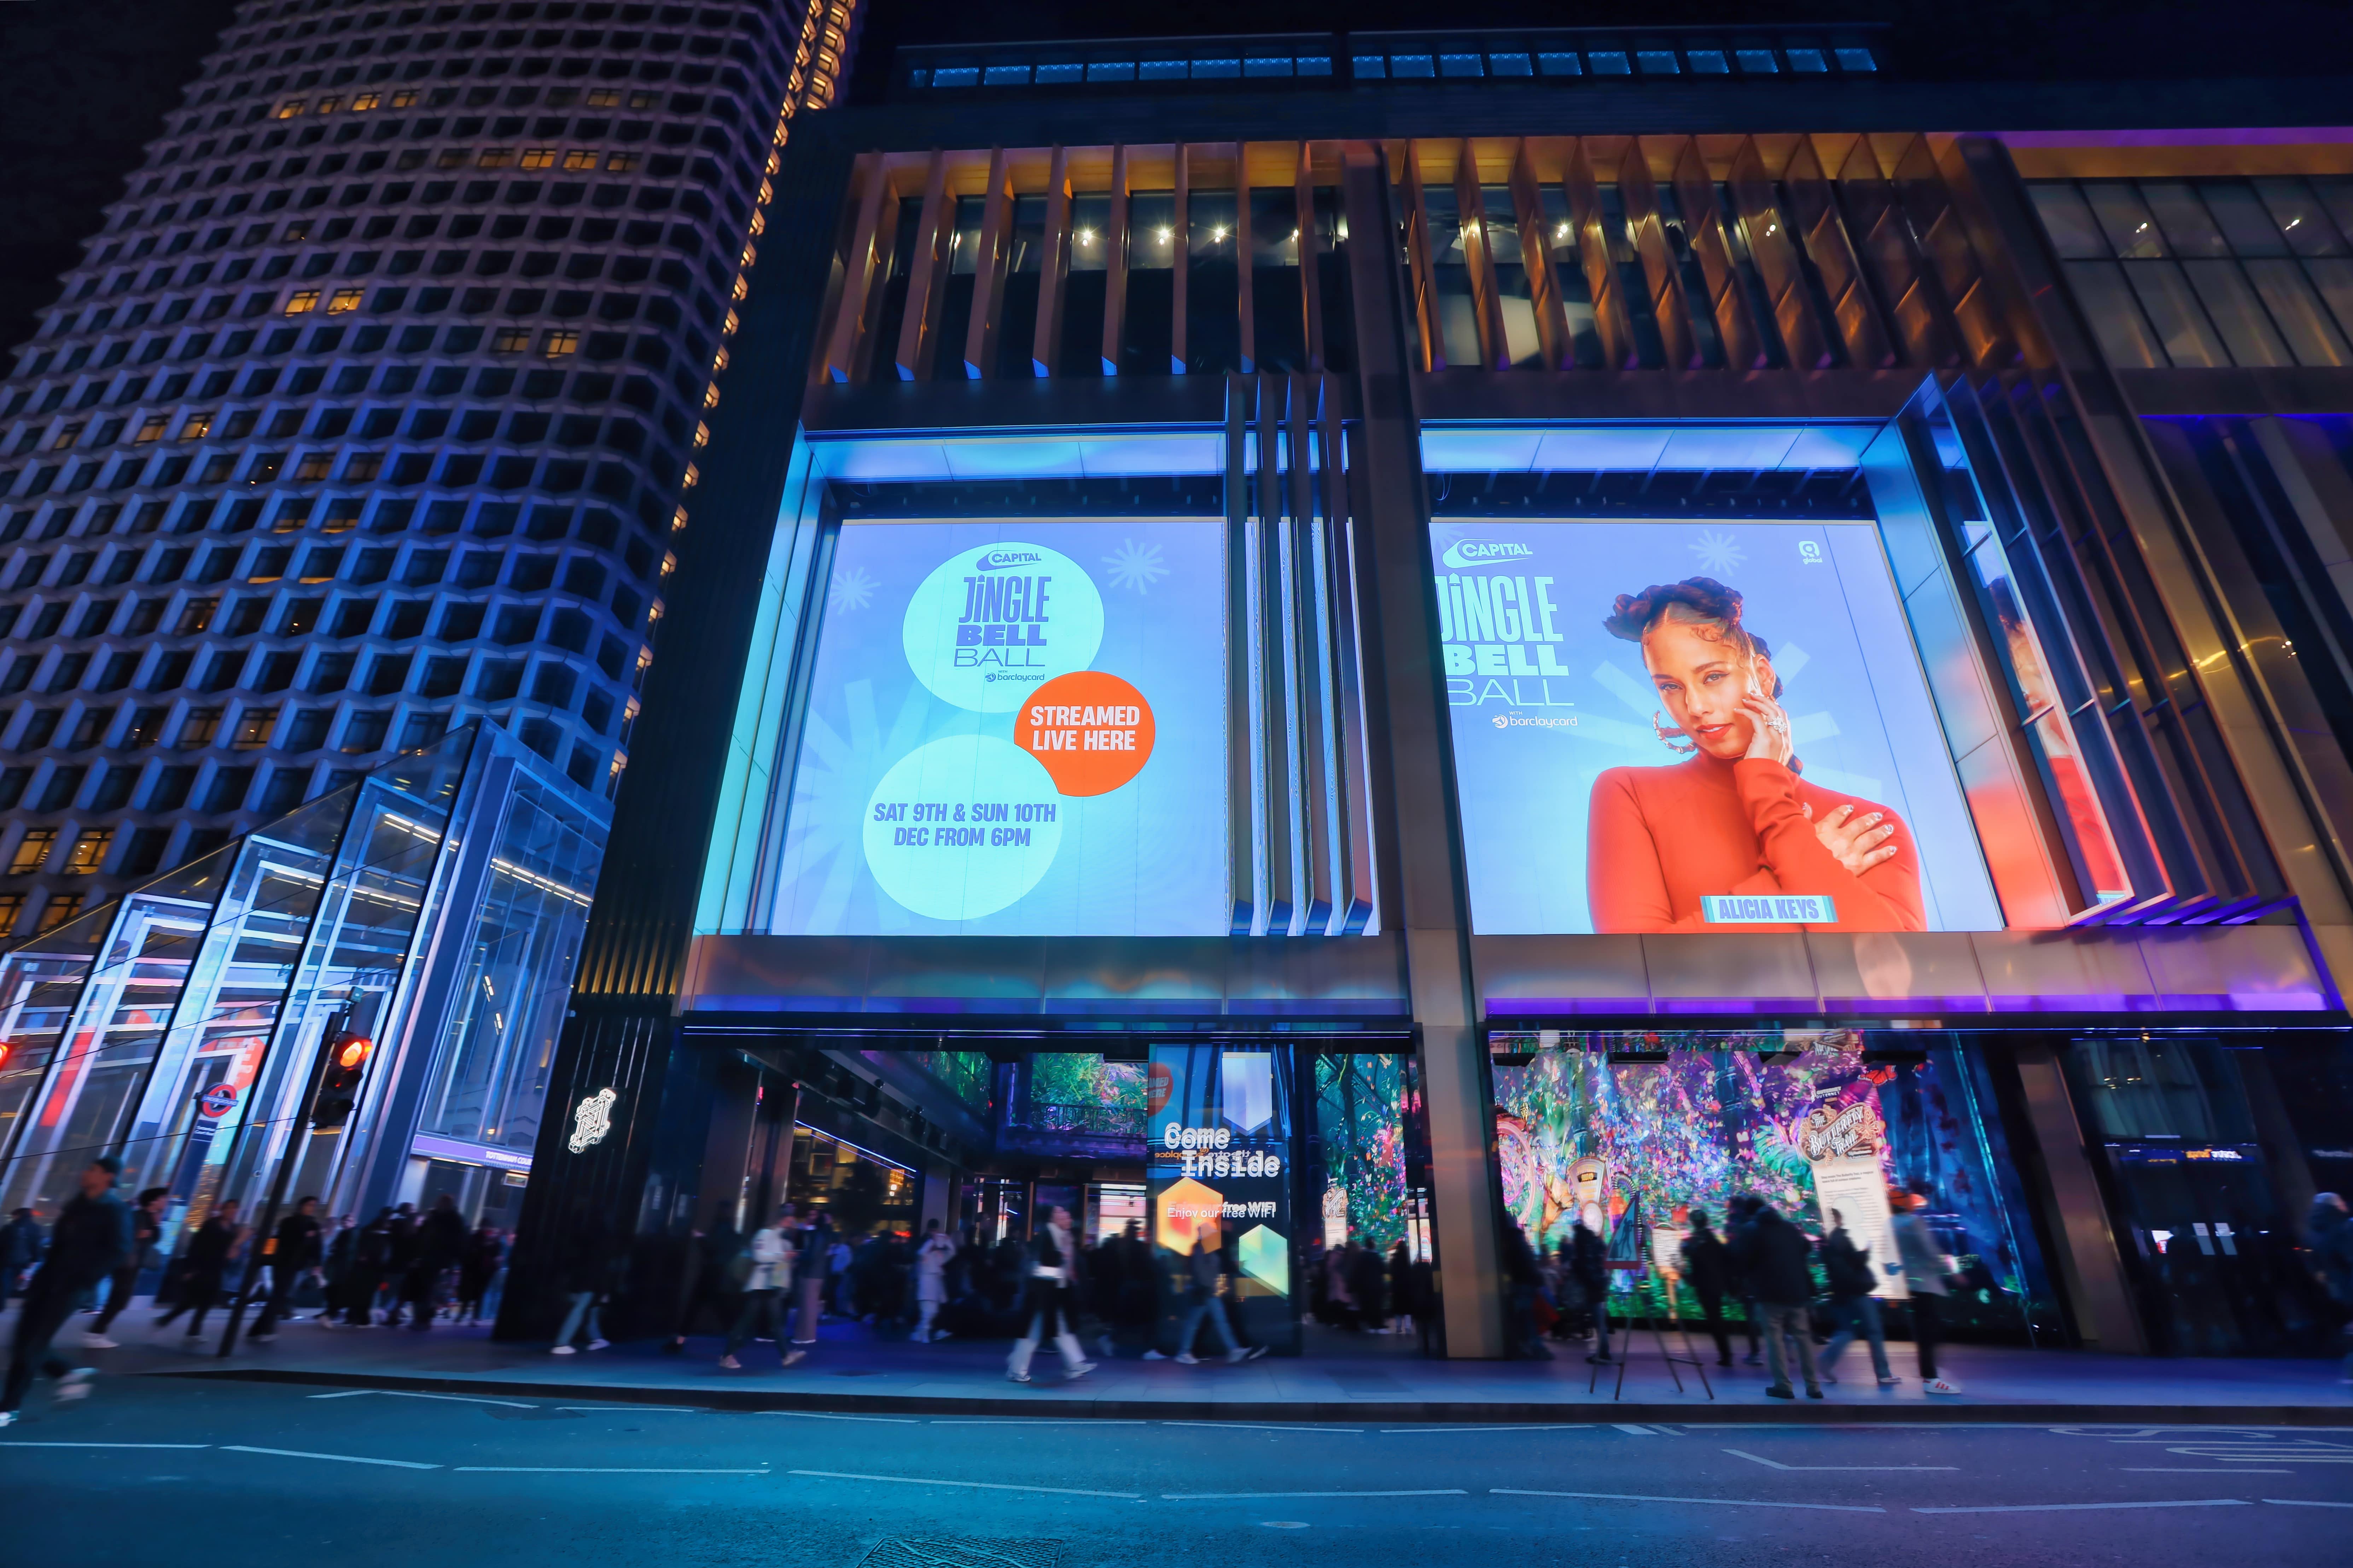 Barclaycard and Global to stream Capital’s Jingle Bell Ball on Outernet Screens  